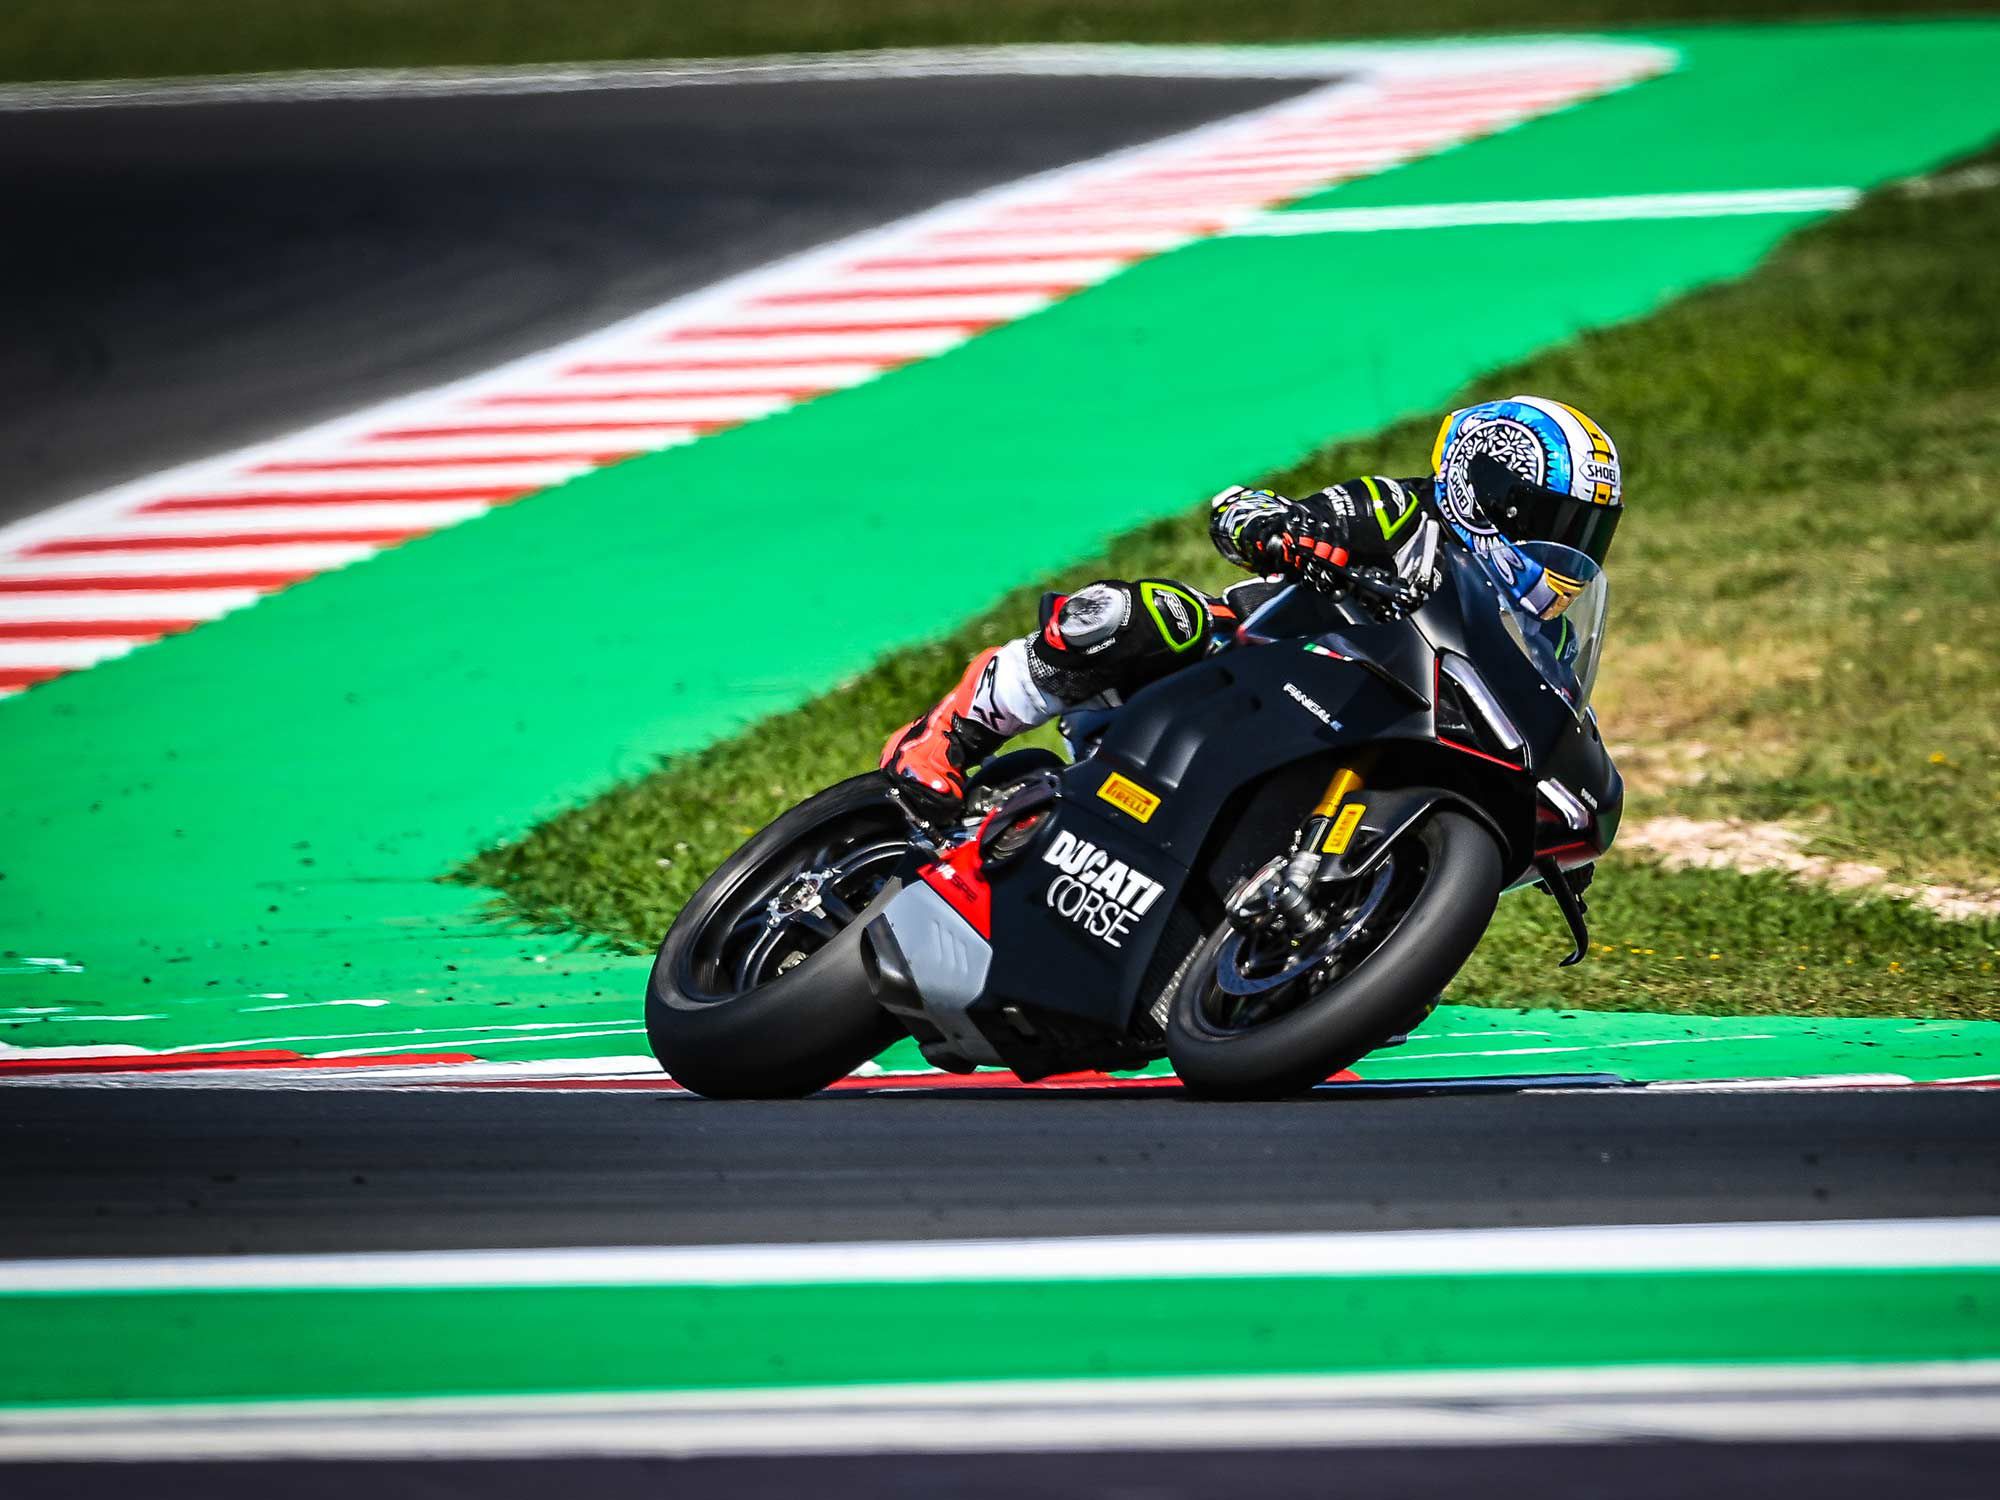 Riding the new SP2 alongside a standard V4 S at Italy’s Misano MotoGP racetrack.